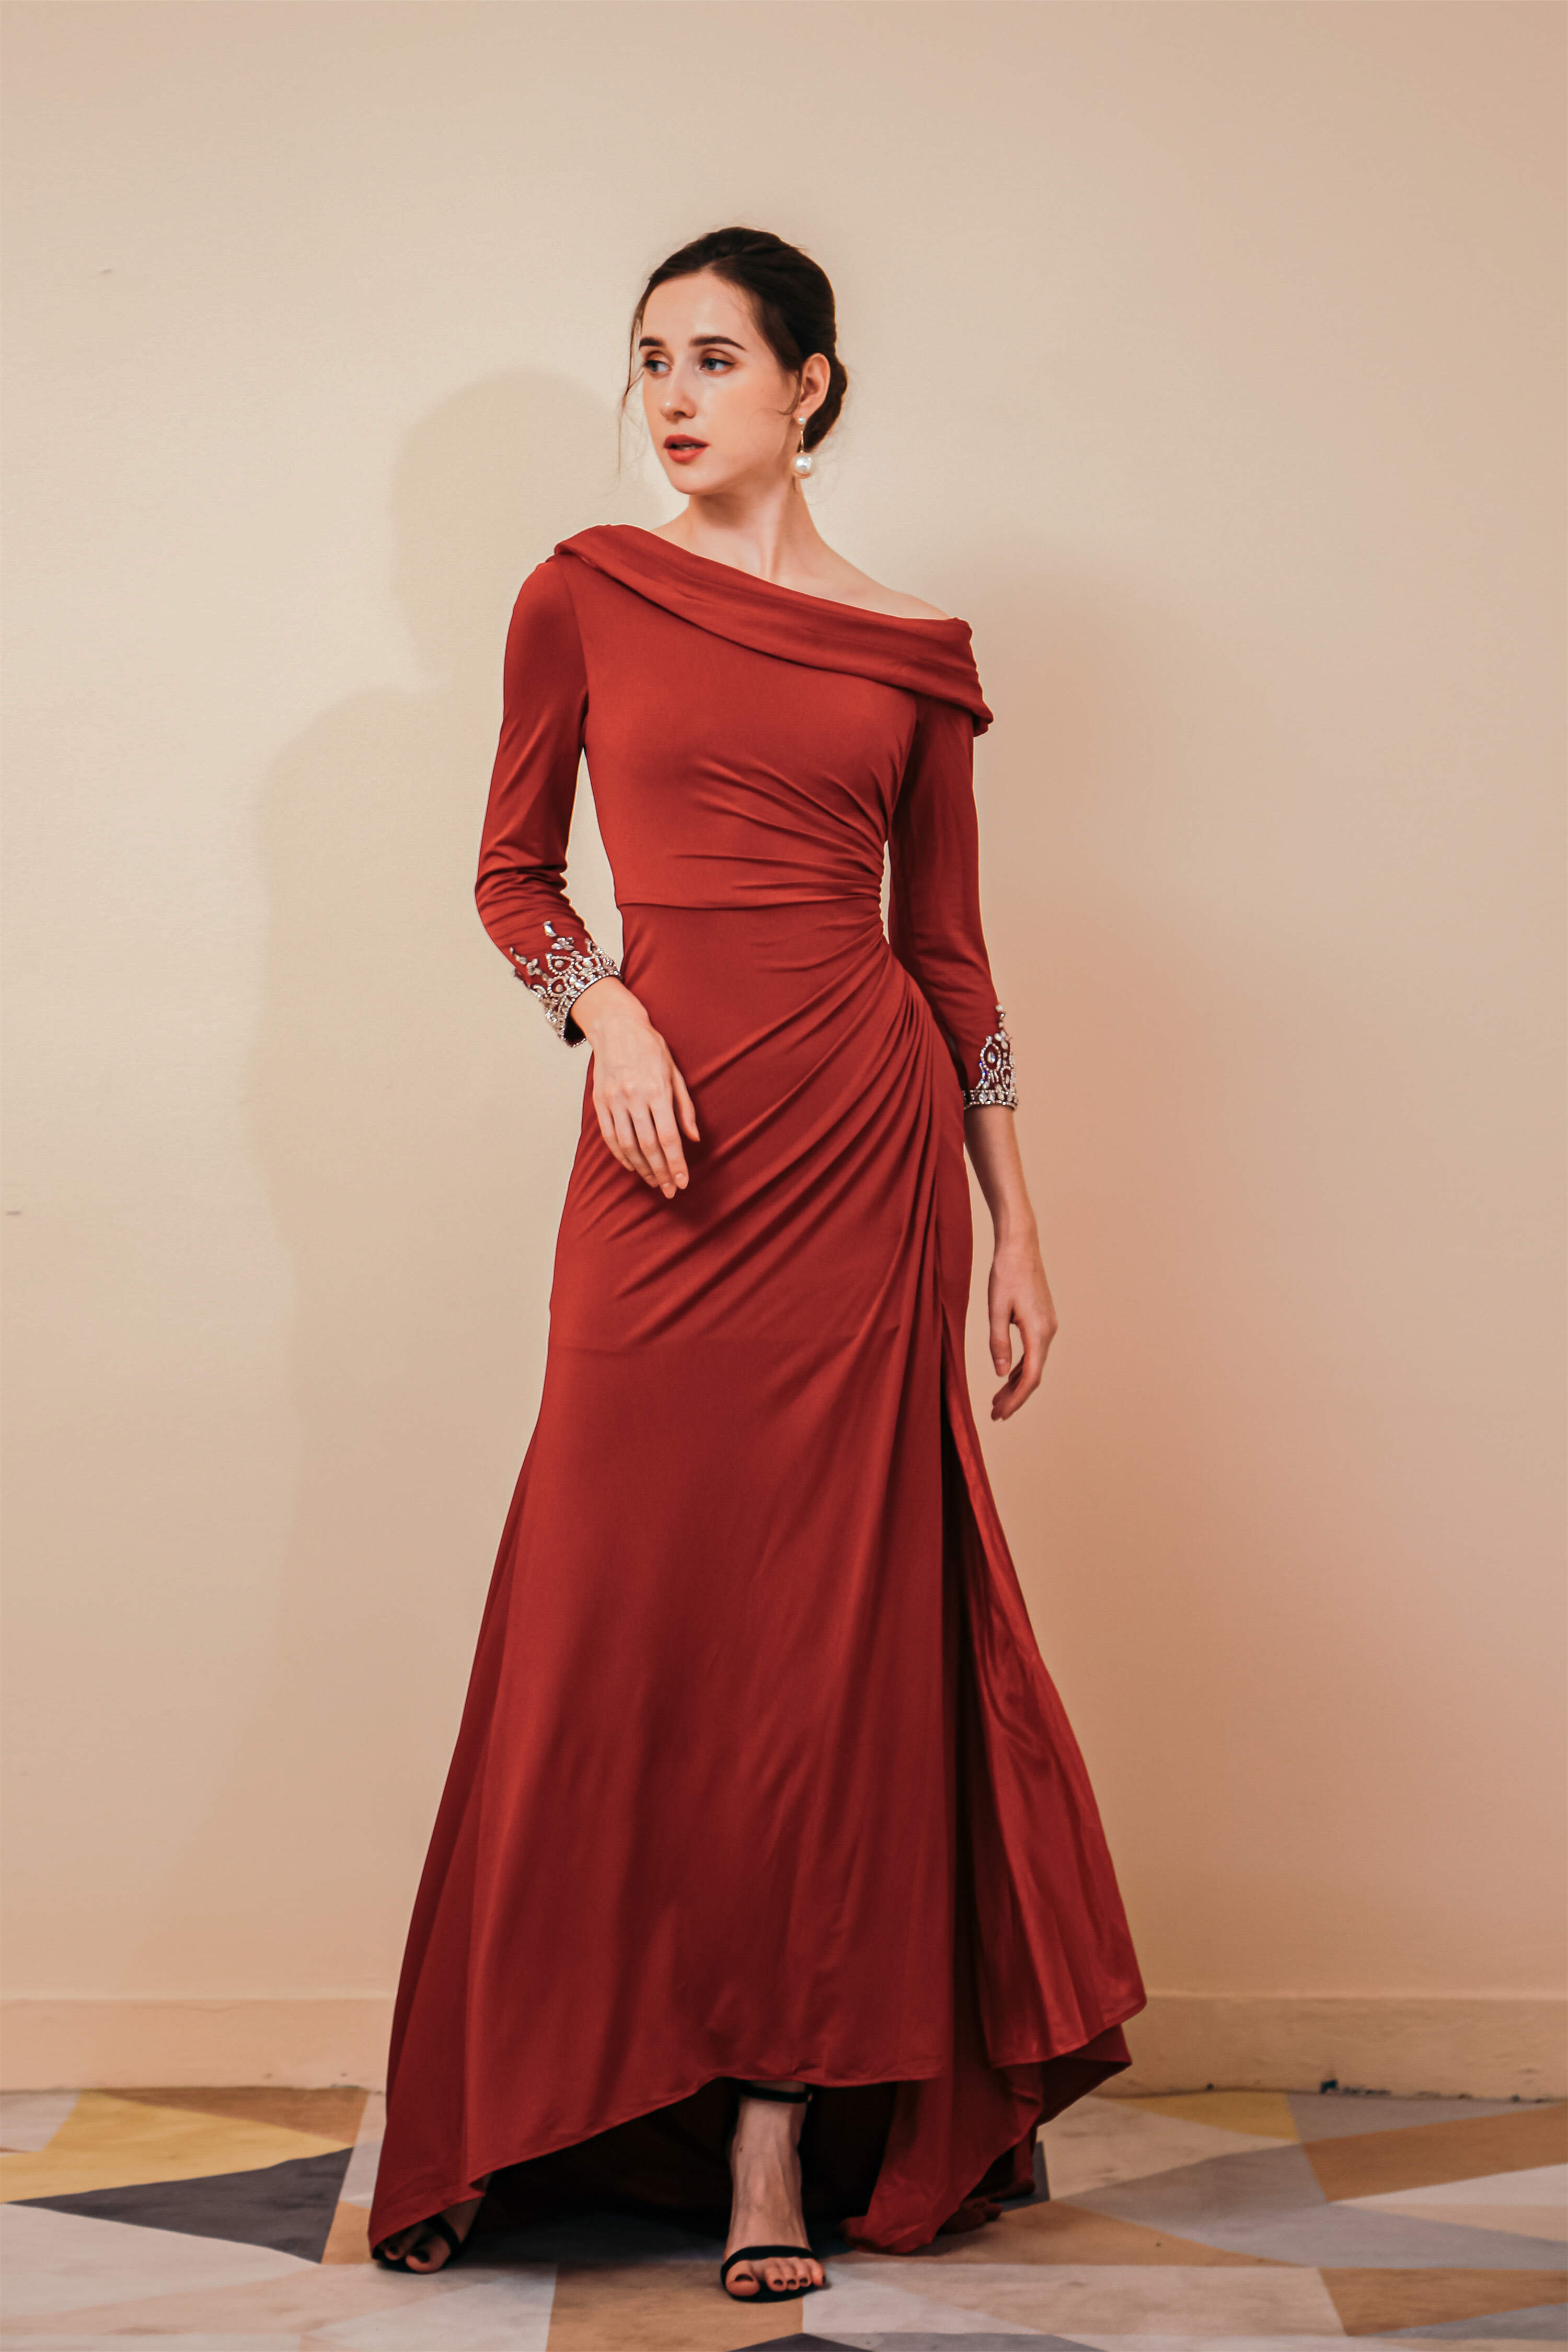 Party Dress After Wedding, Long Sleeves Mermaid Burgundy Long Mother of the Bride Dresses